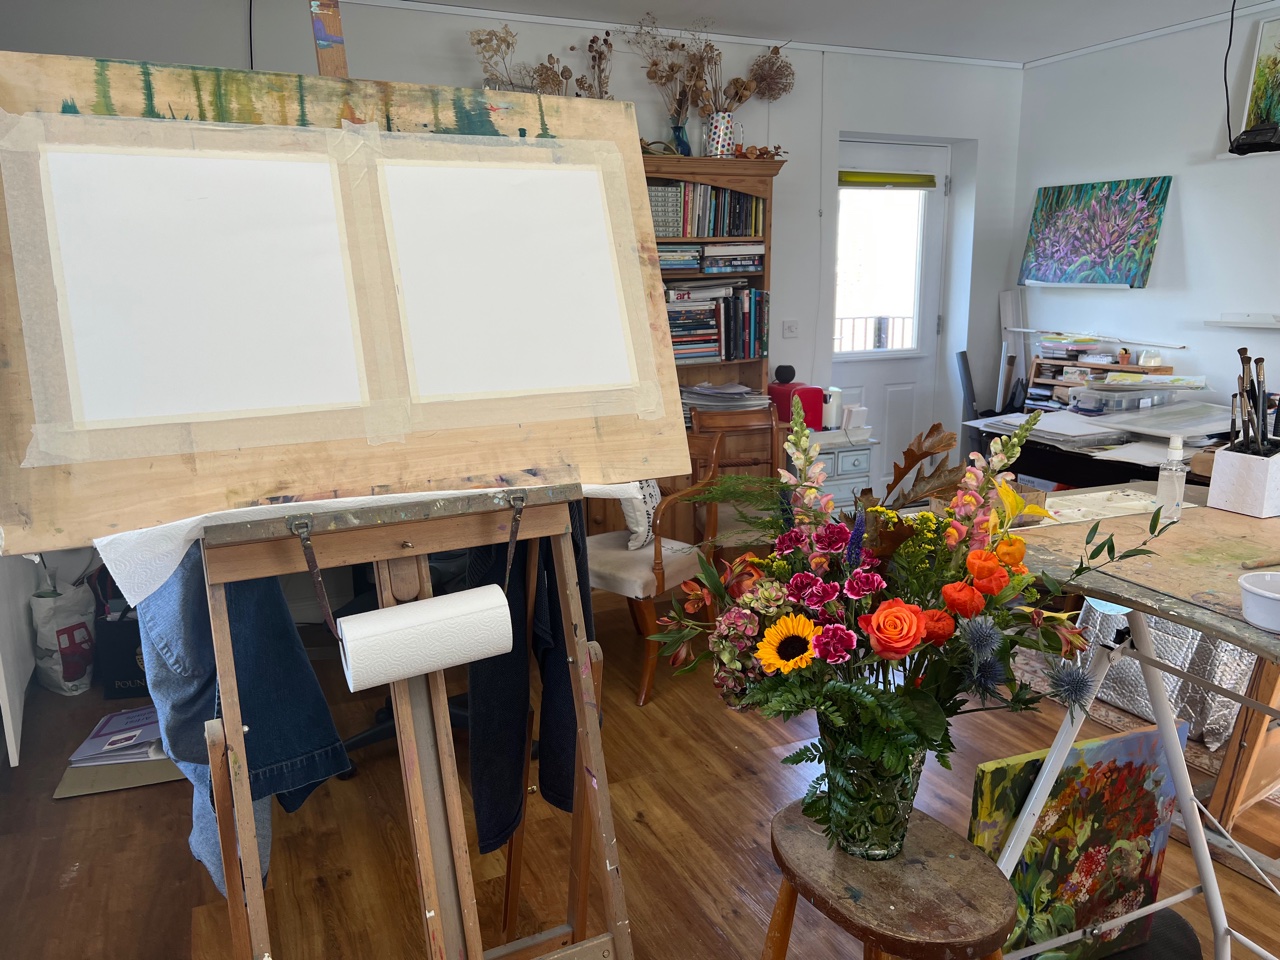 Judy Tate's studio and what's coming up next!